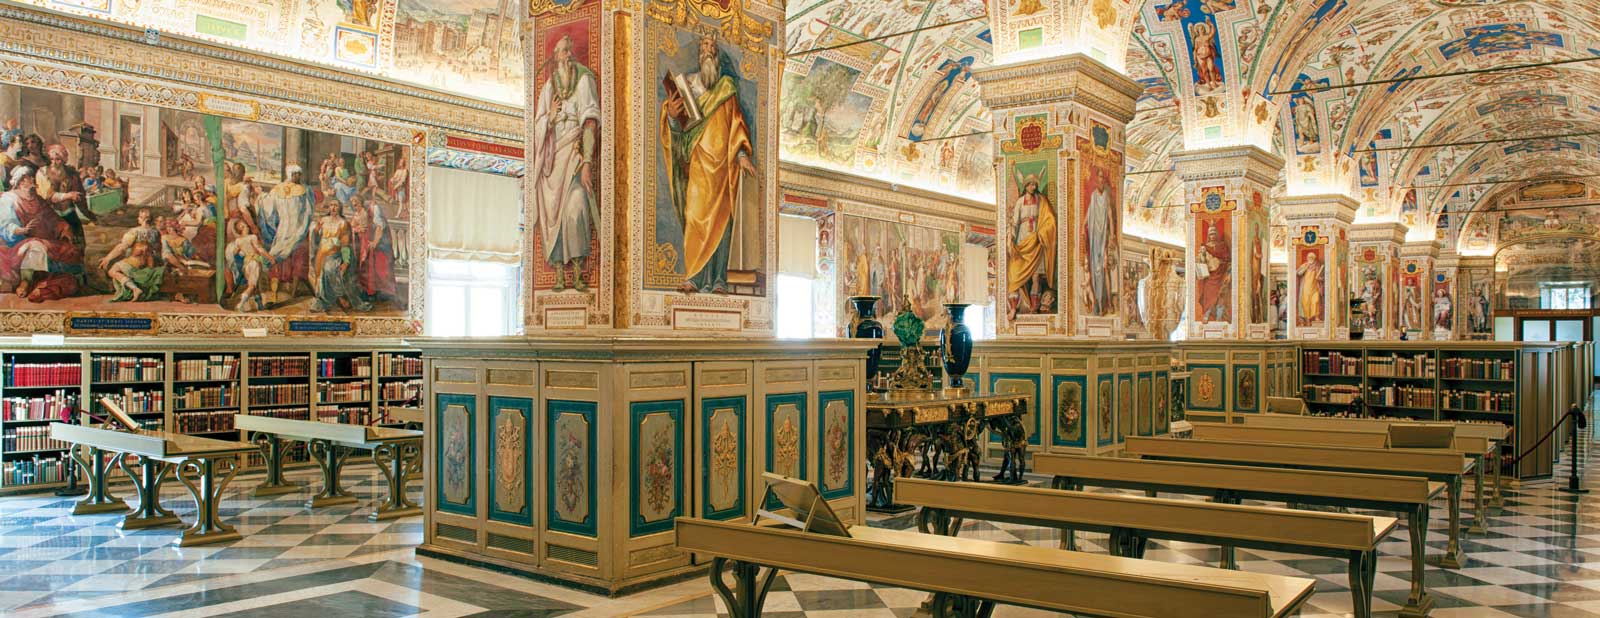 Sistine Hall at the Vatican Library